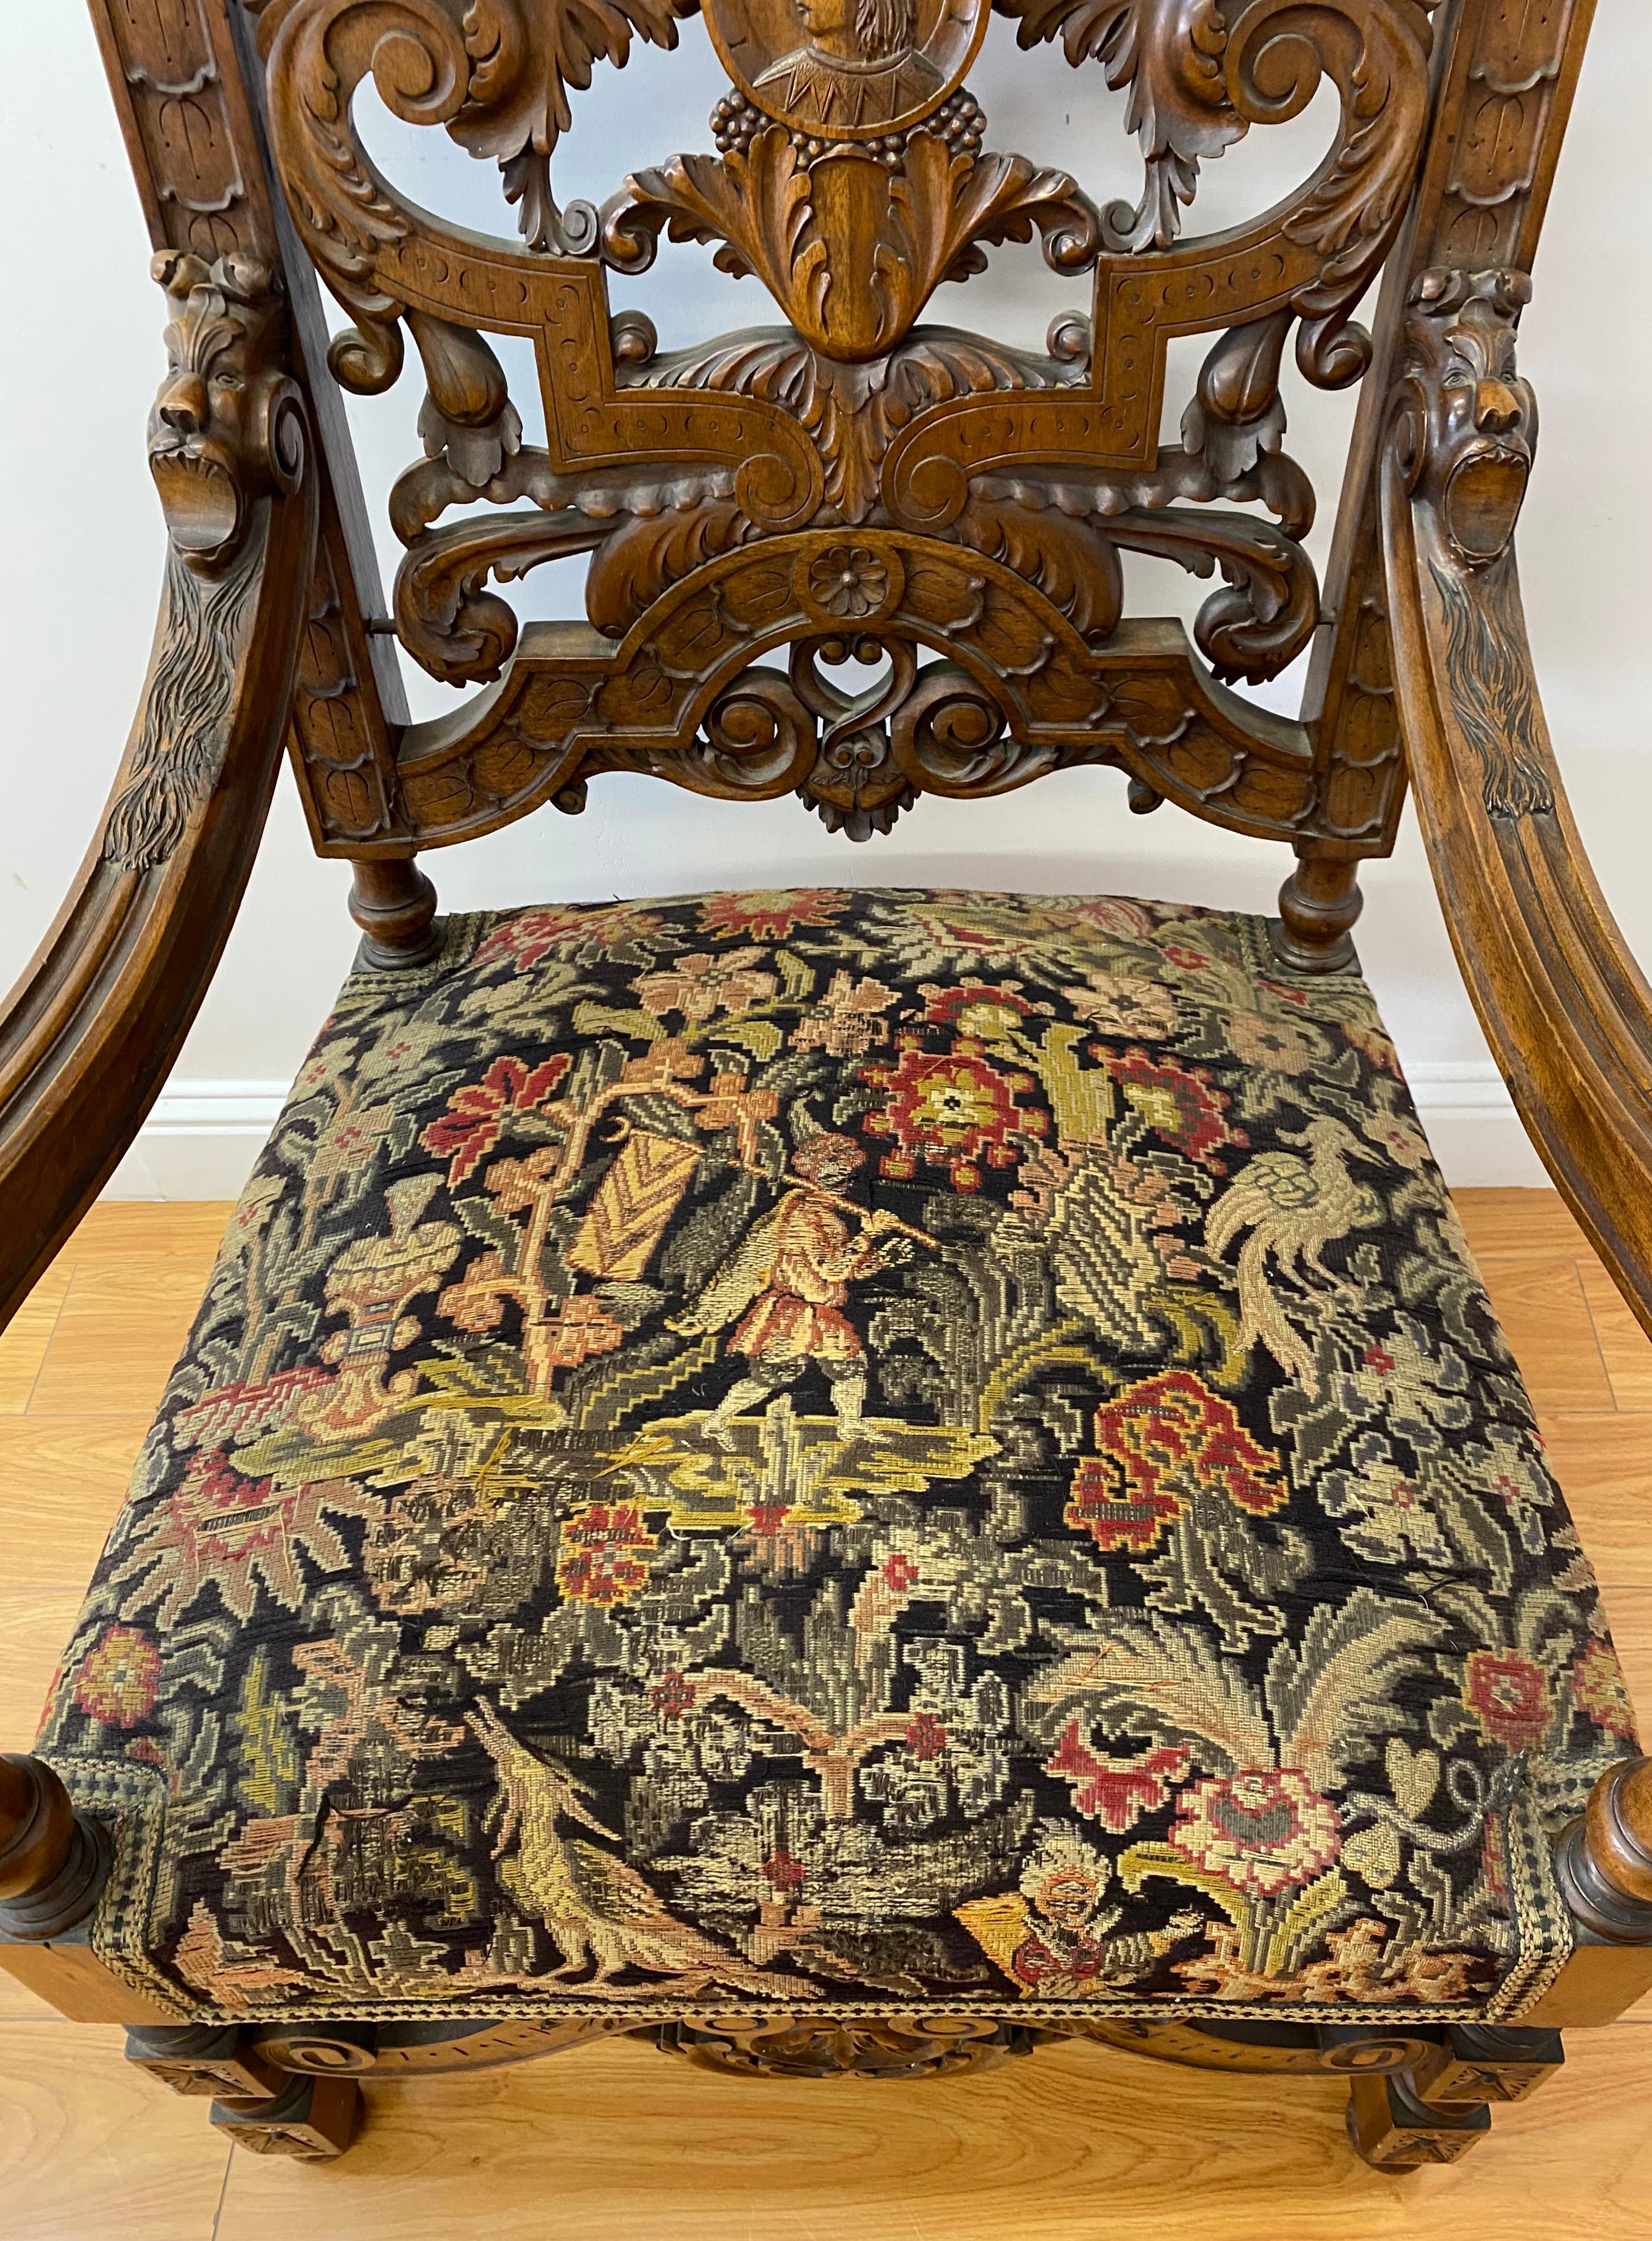 English 19th Century European Carved Walnut Arm Chair with Tapestry Upholstery